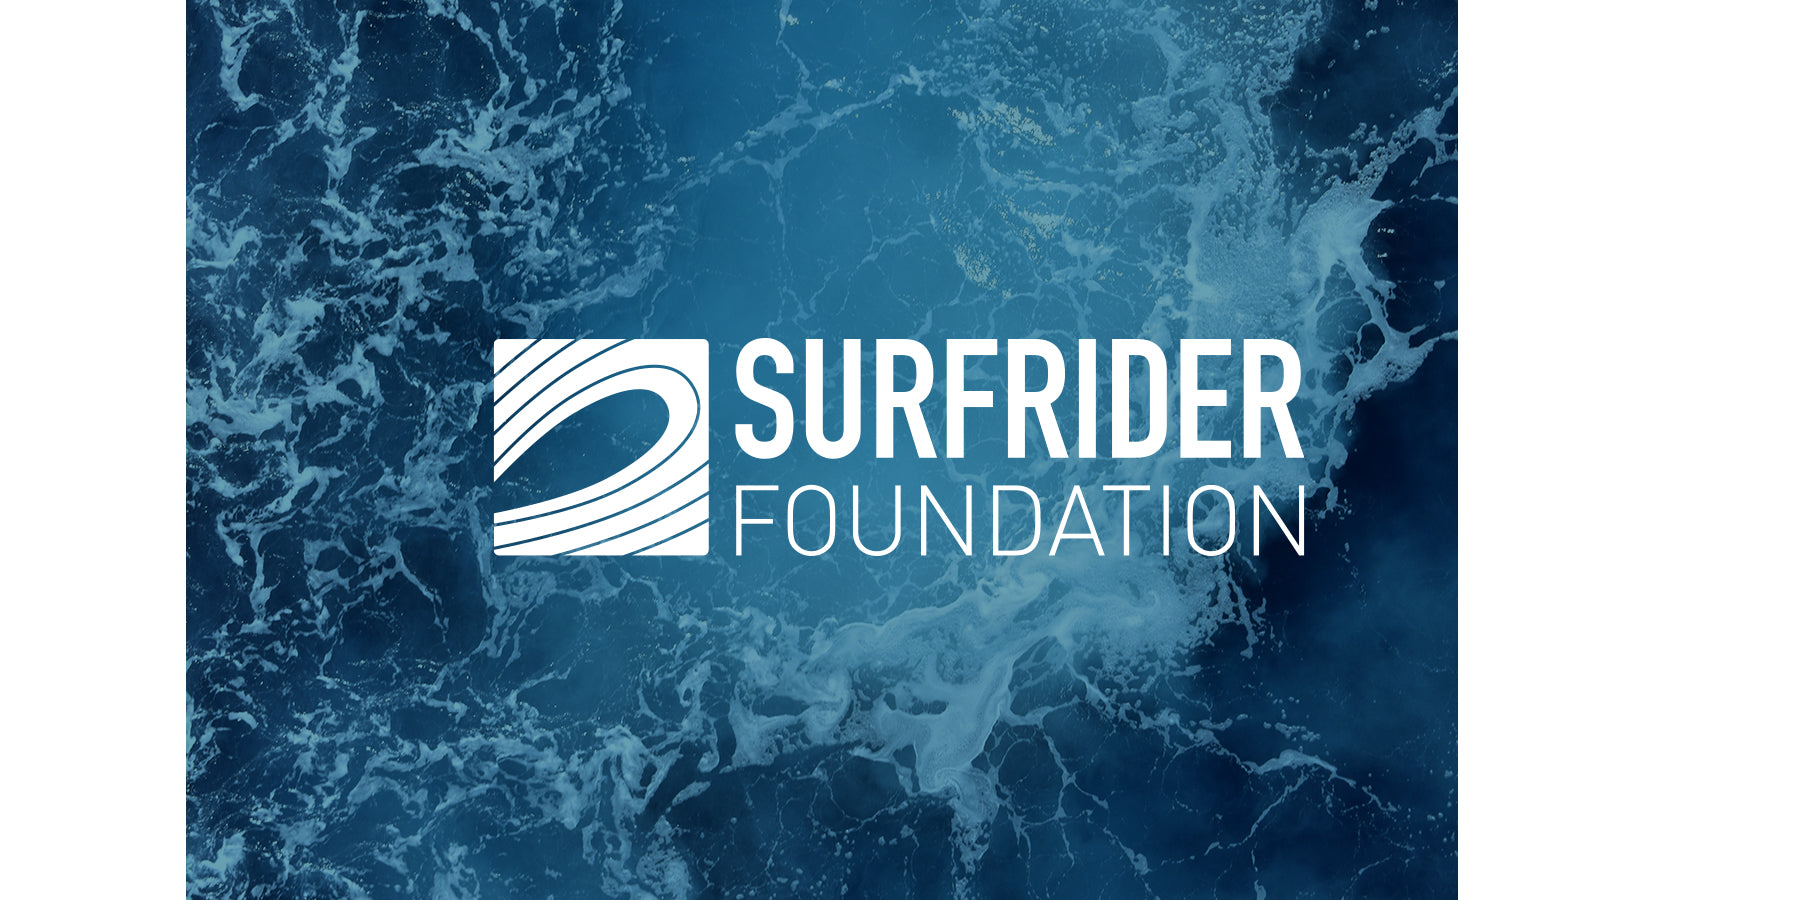 Our Partnership with the Surfrider Foundation